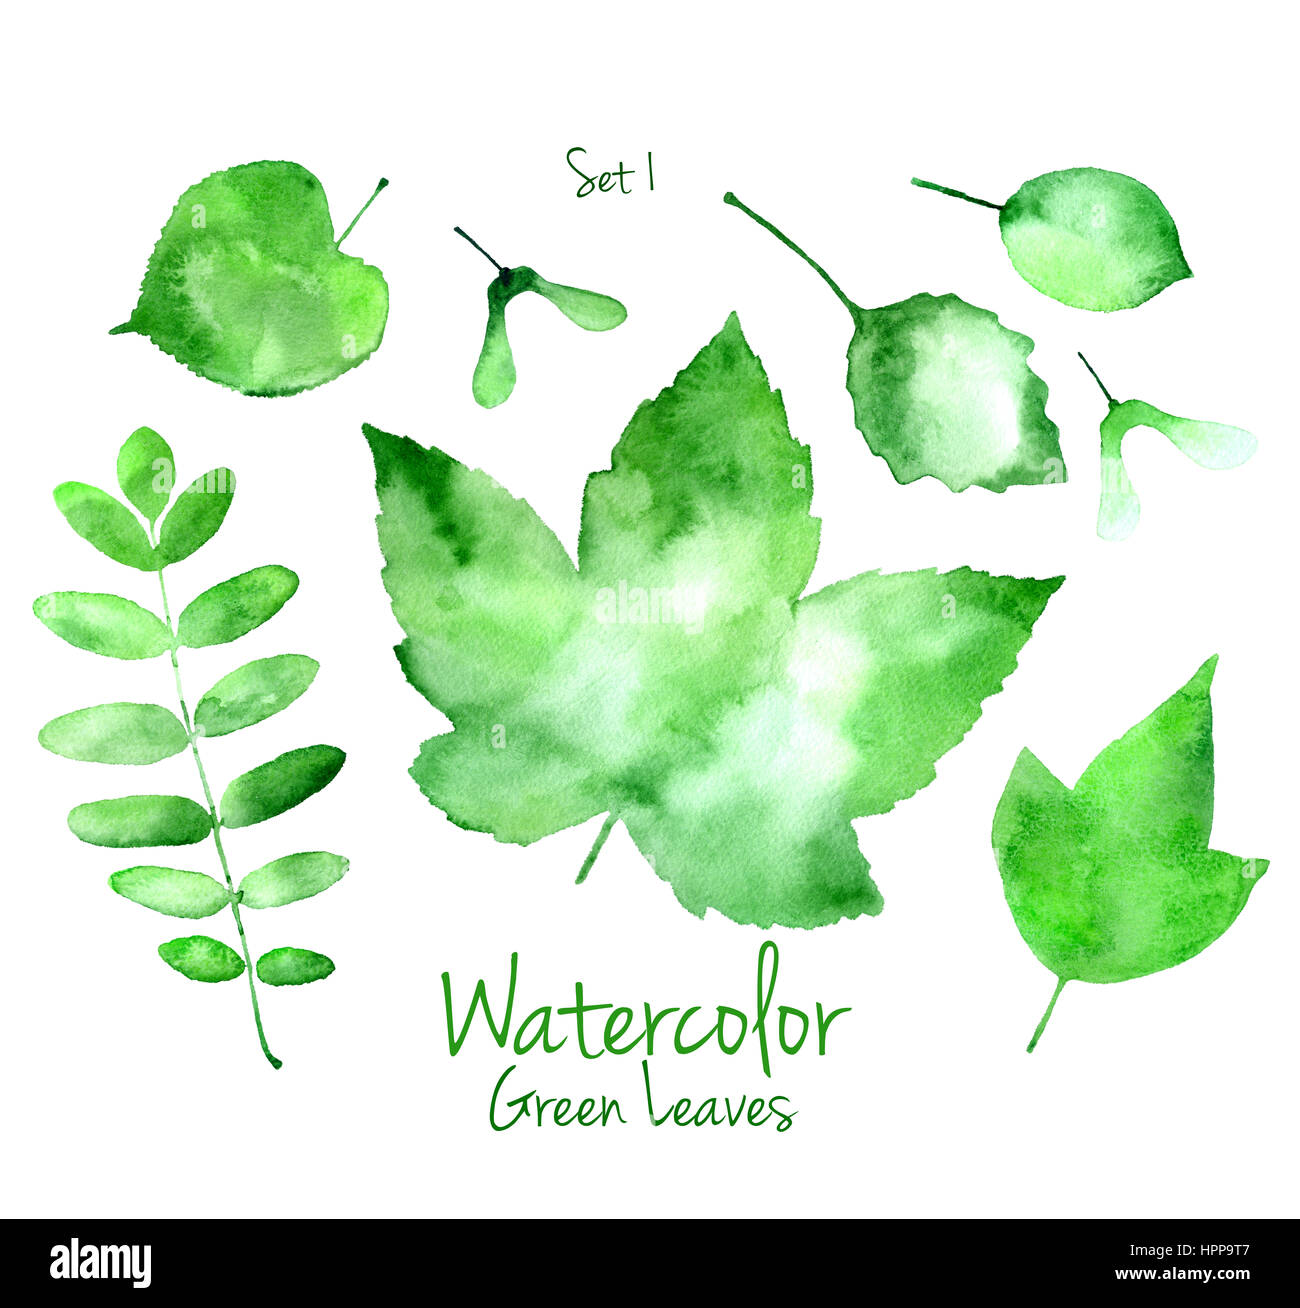 Collection of green summer watercolor leaves isolated on white background. Set 1 of maple, oak, rowan, basswood and linden tree leaves Stock Photo